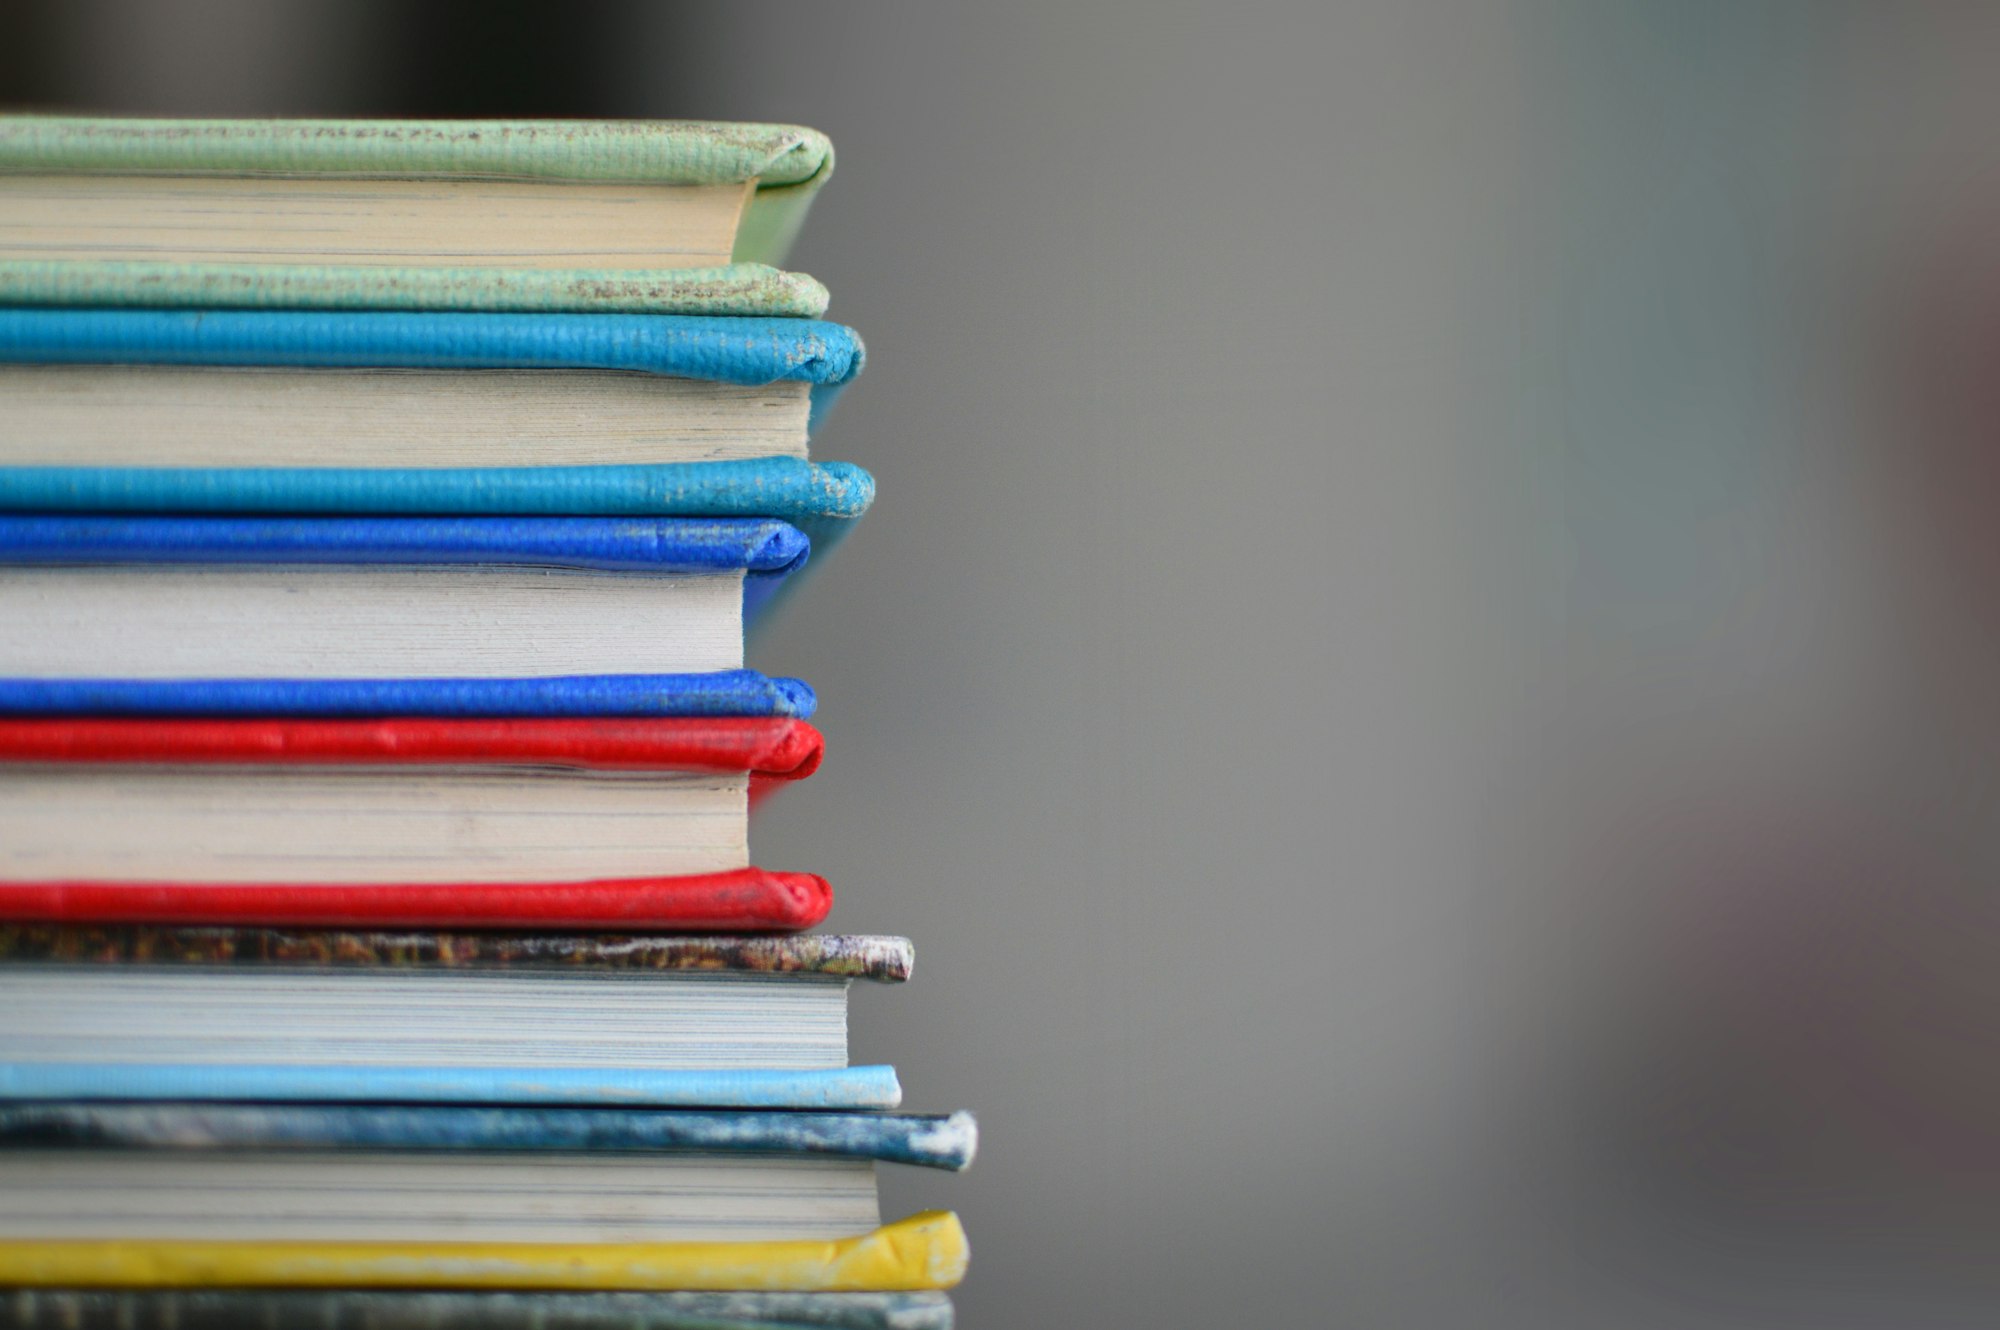 9 essential books for software engineers looking to get ahead